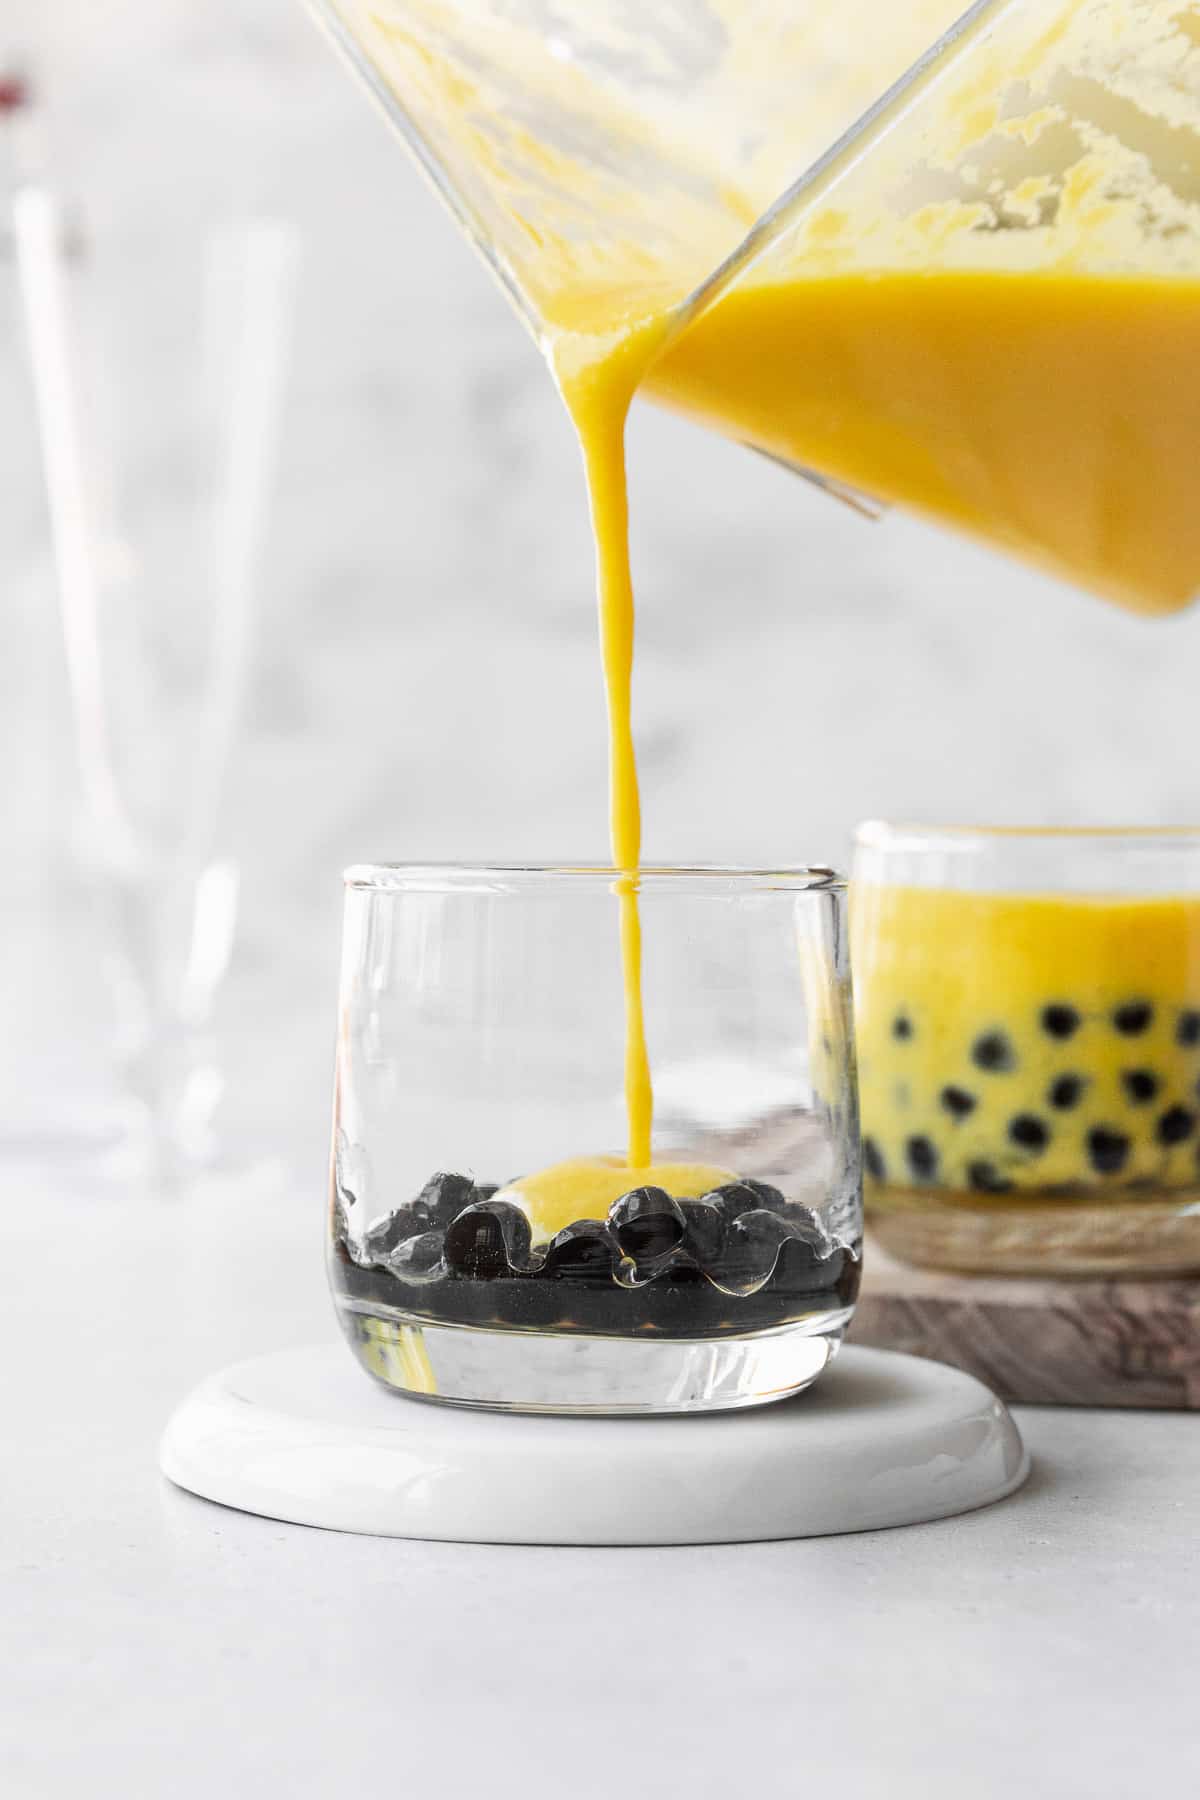 Pouring the mango puree into a small glass with the boba pearls.